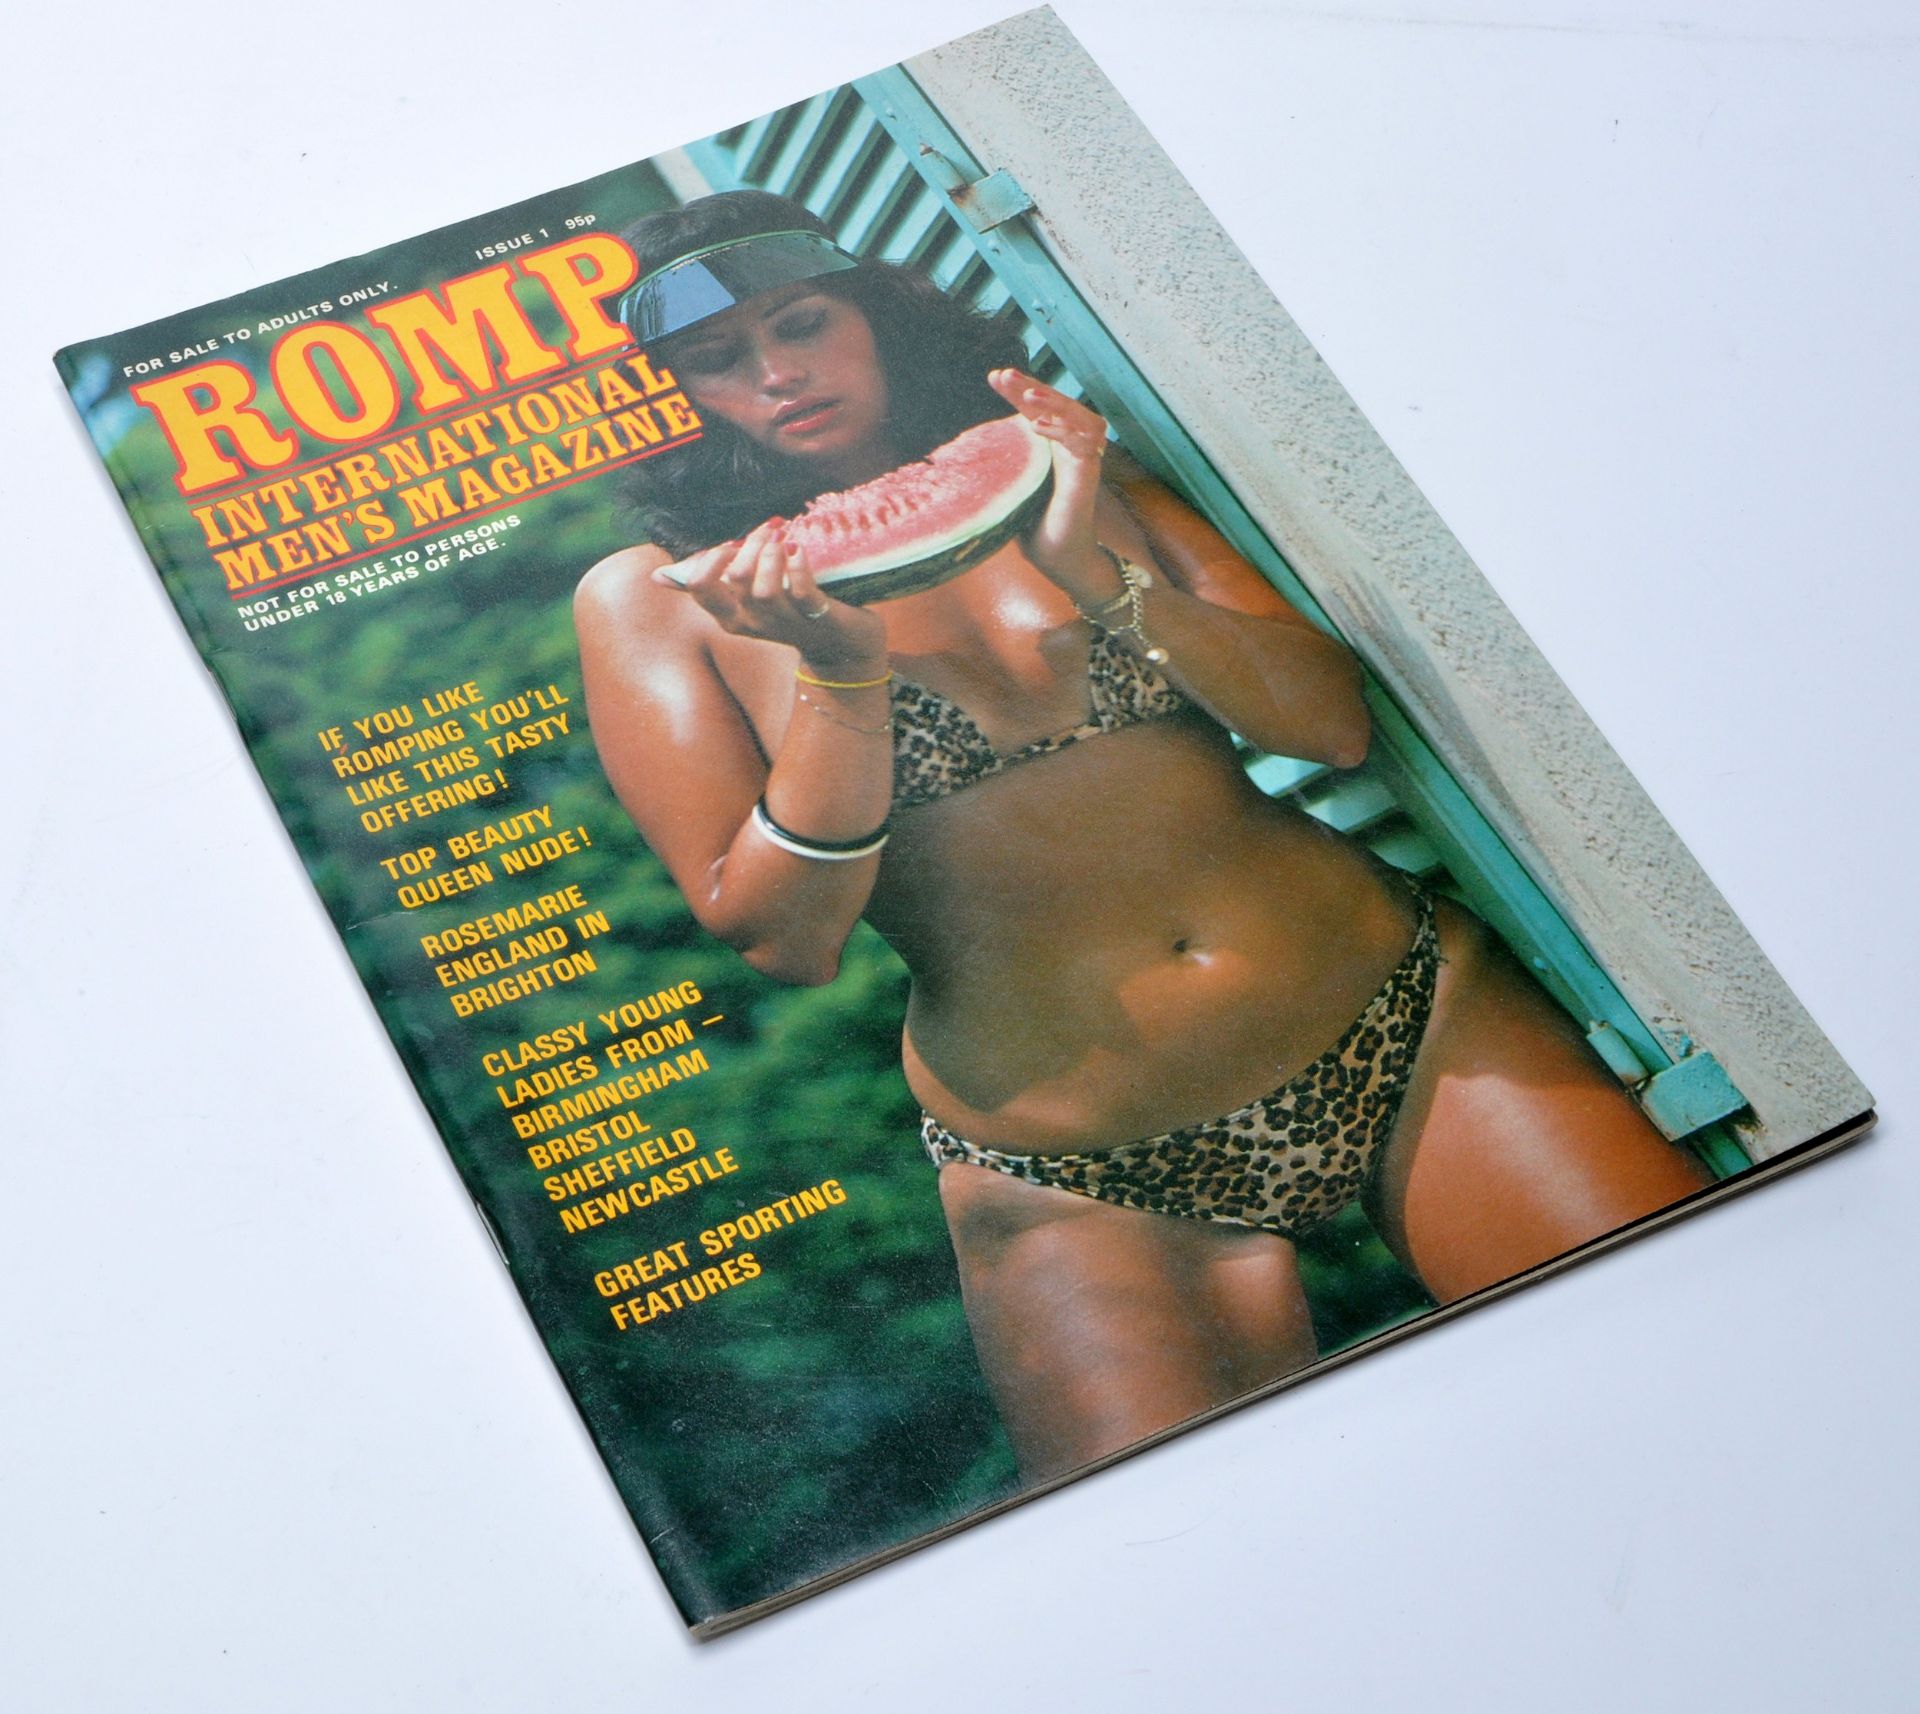 Adult Glamour Magazine / Vintage Erotica, comprising single issue of Romp. Issue 1. Please note